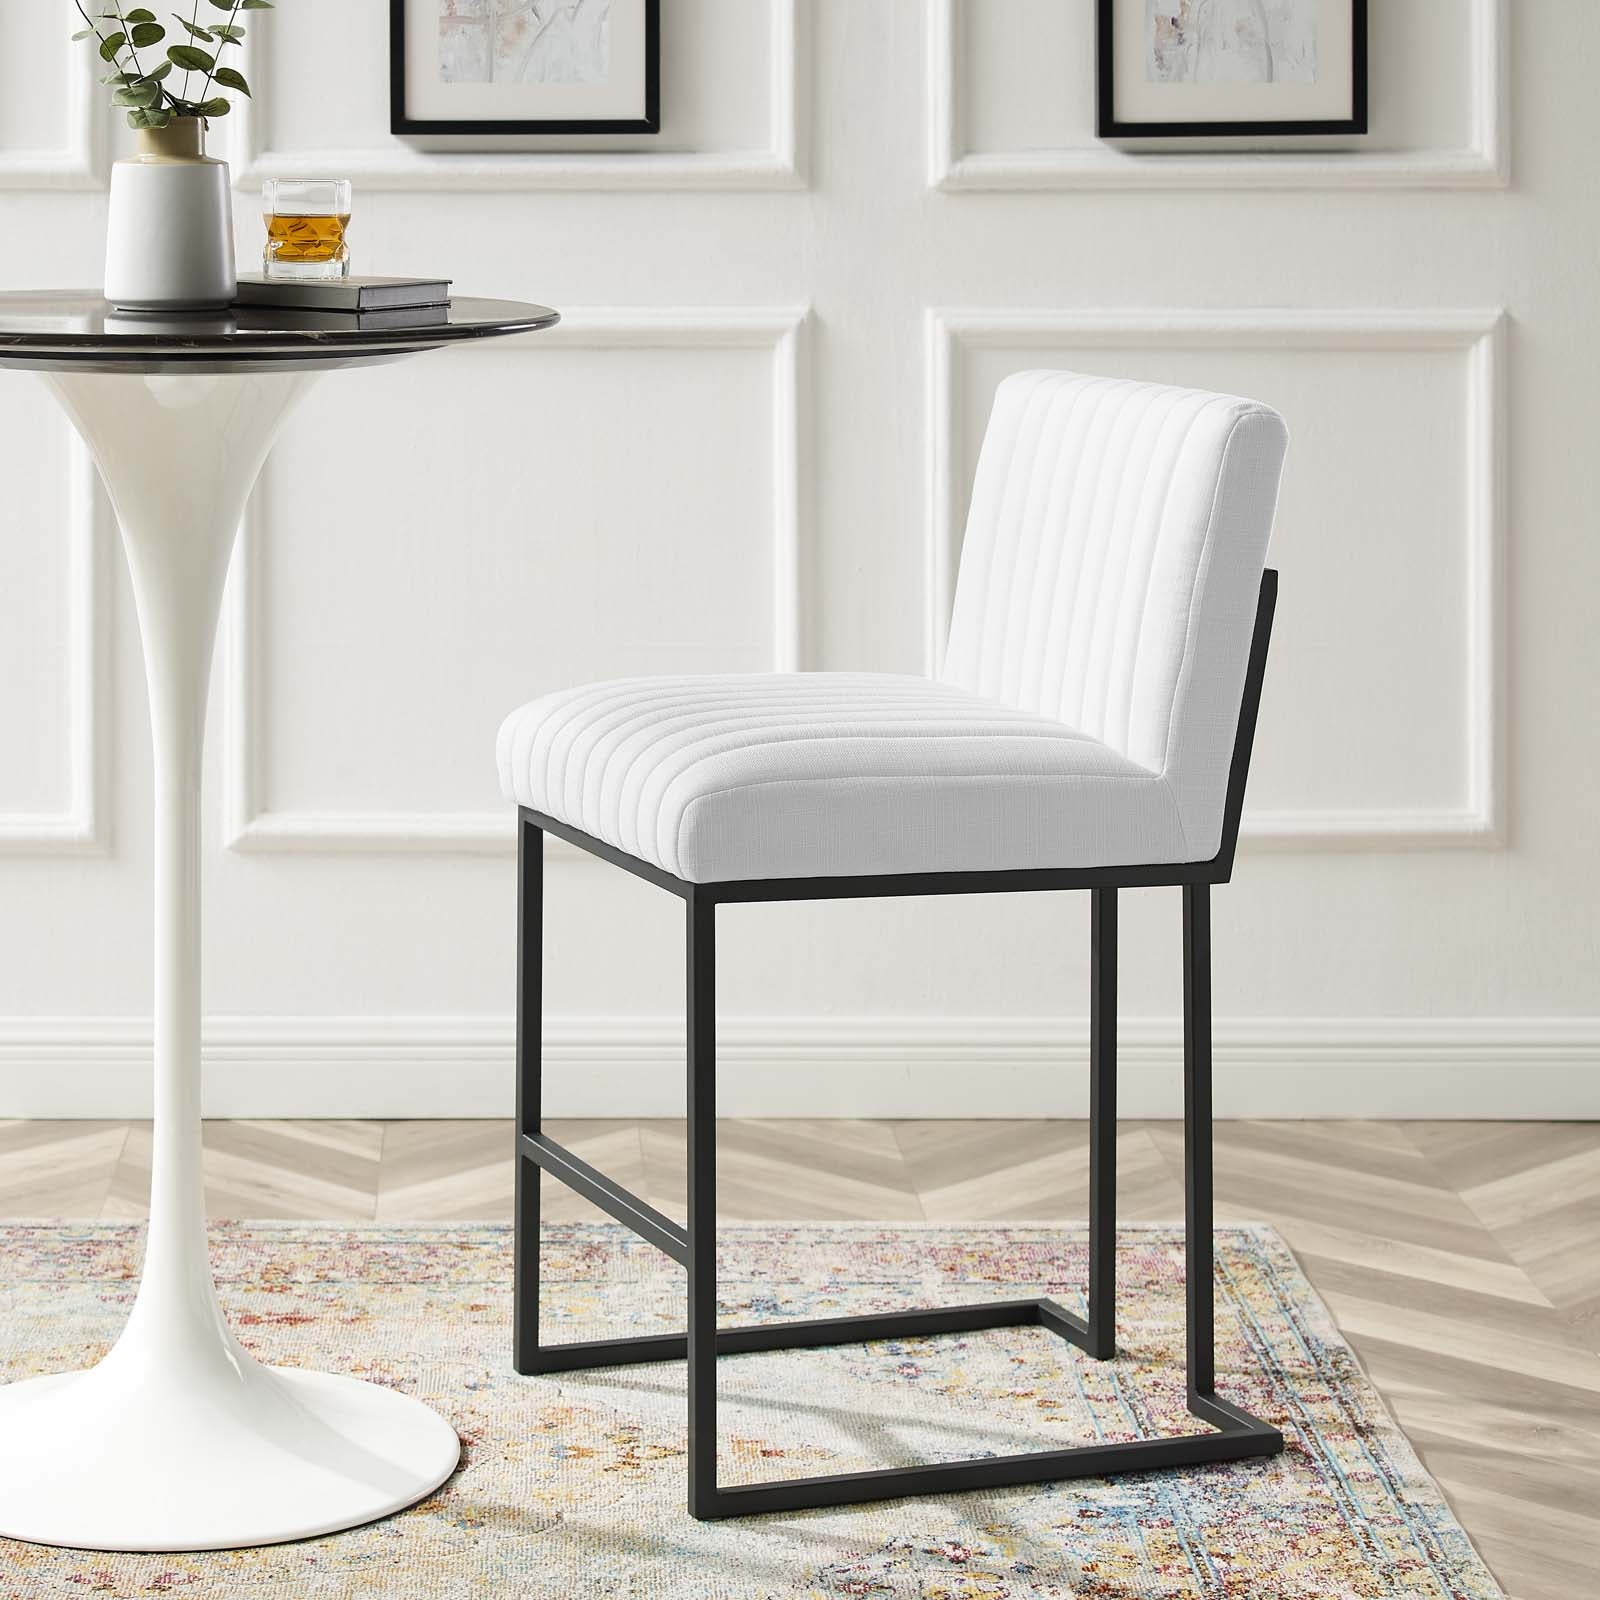 Modway Barstools - Indulge Channel Tufted Fabric Counter Stool White